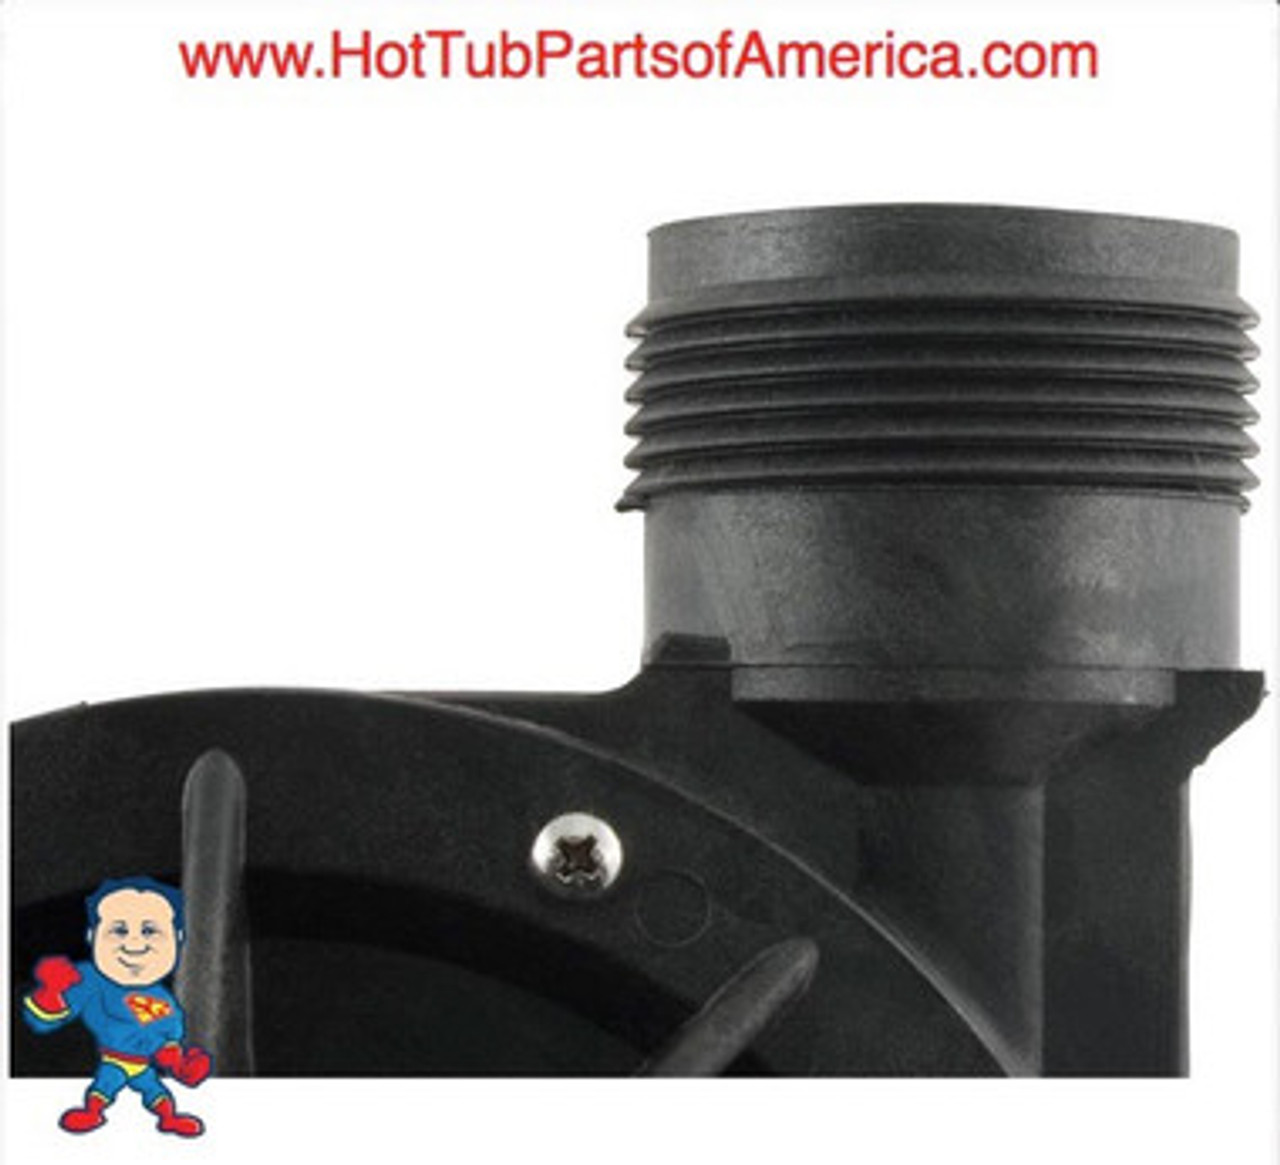 Wet End, Aqua-Flo, FMHP, 2.0HP, 1-1/2", 48 frame, 10.0A/230V, 16A/115v
This is a 48 Frame Wet End and the Thru-Bolts are about 5 1/4" apart in a cross pattern and 3 5/8" Side to Side....Also the bolt heads on the thru-bolts are 1/4" on a 48 frame motor..IF your bolt heads are 5/16" you have a 56fr motor and this wet end will not work..